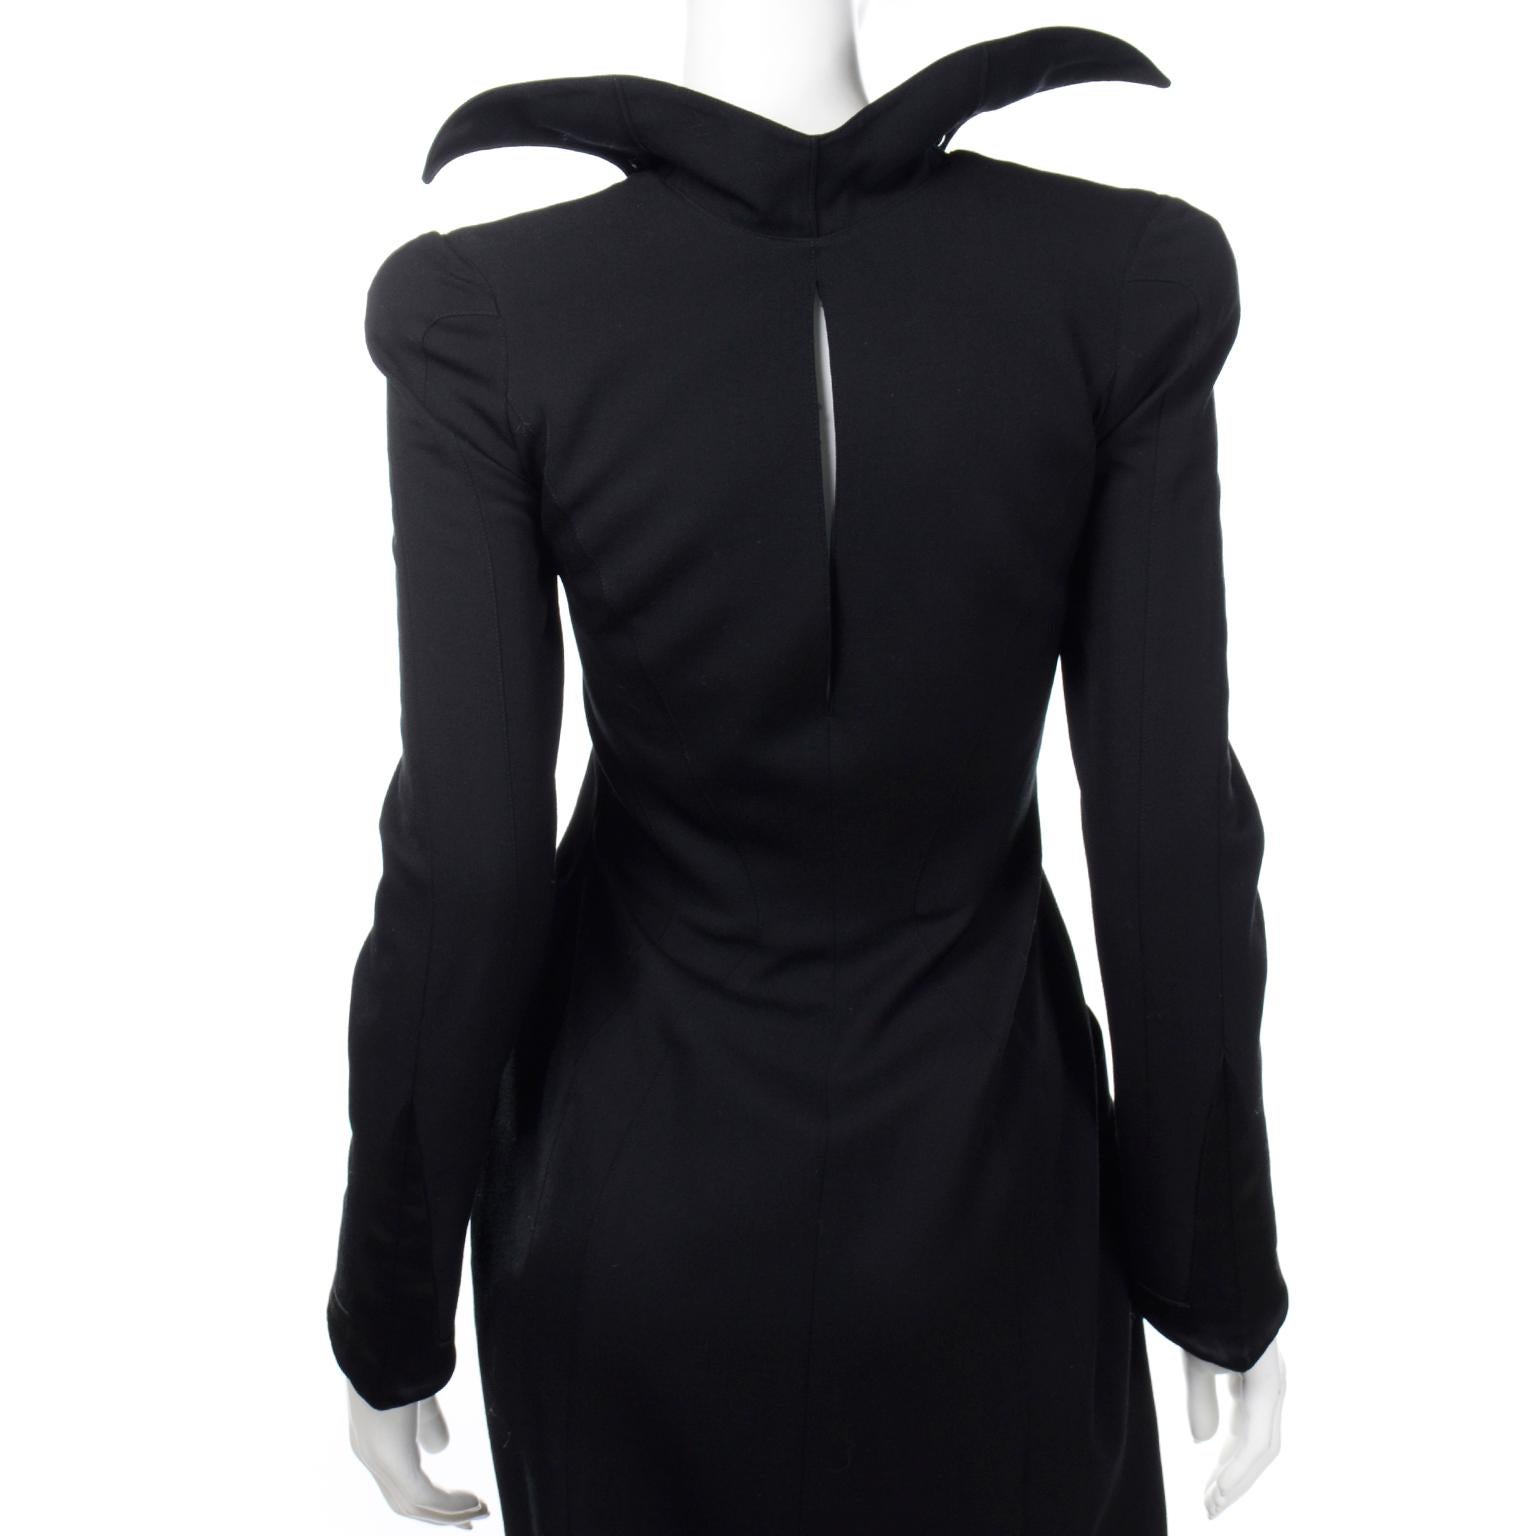 Women's Vintage Thierry Mugler Black Evening Dress or Evening Coat With Pop Up Collar